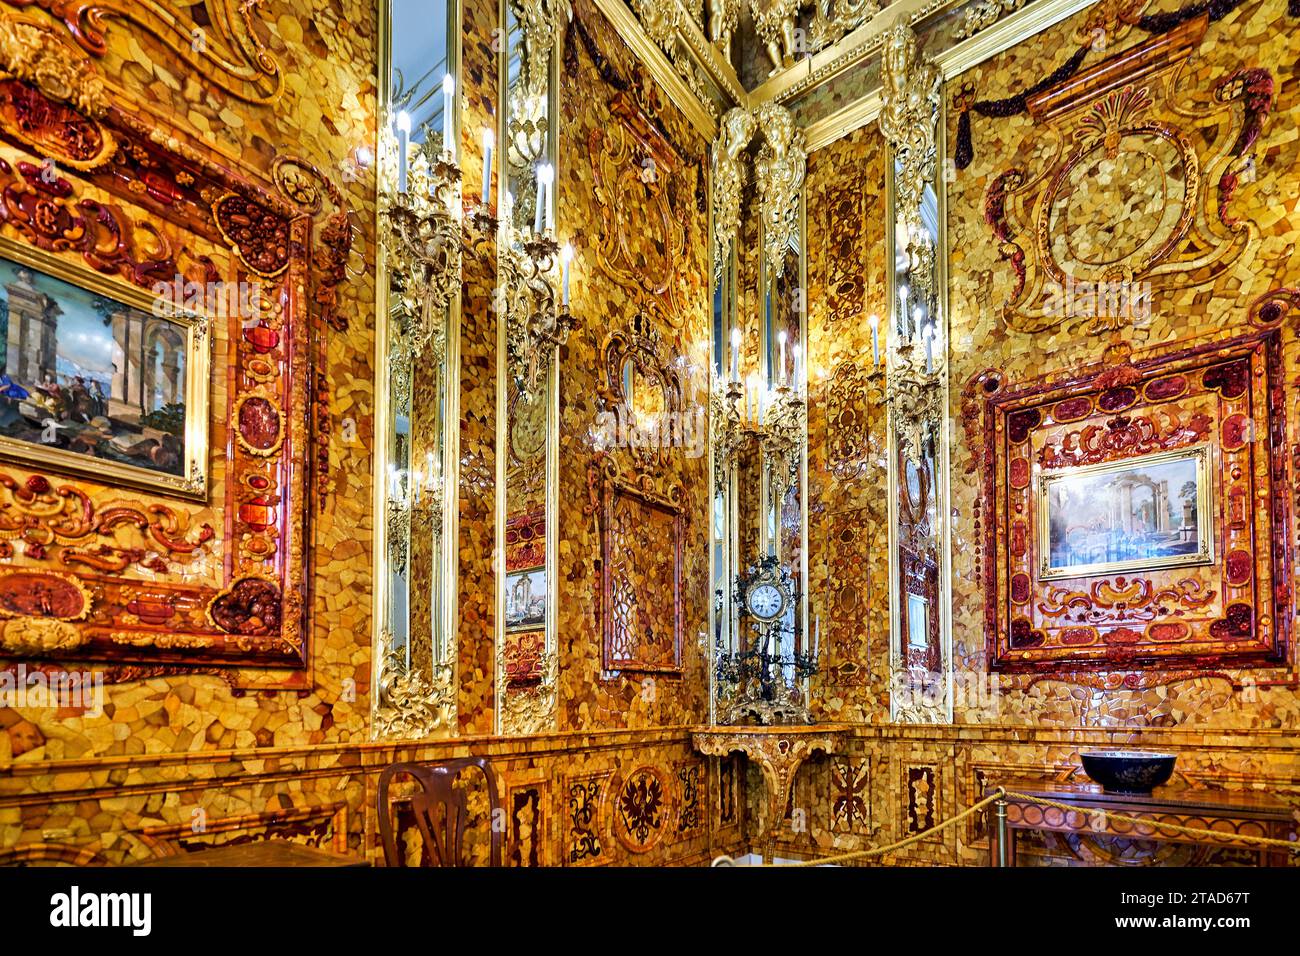 The Amber Room inside Catherine Palace. St. Petersburg Russia Stock Photo